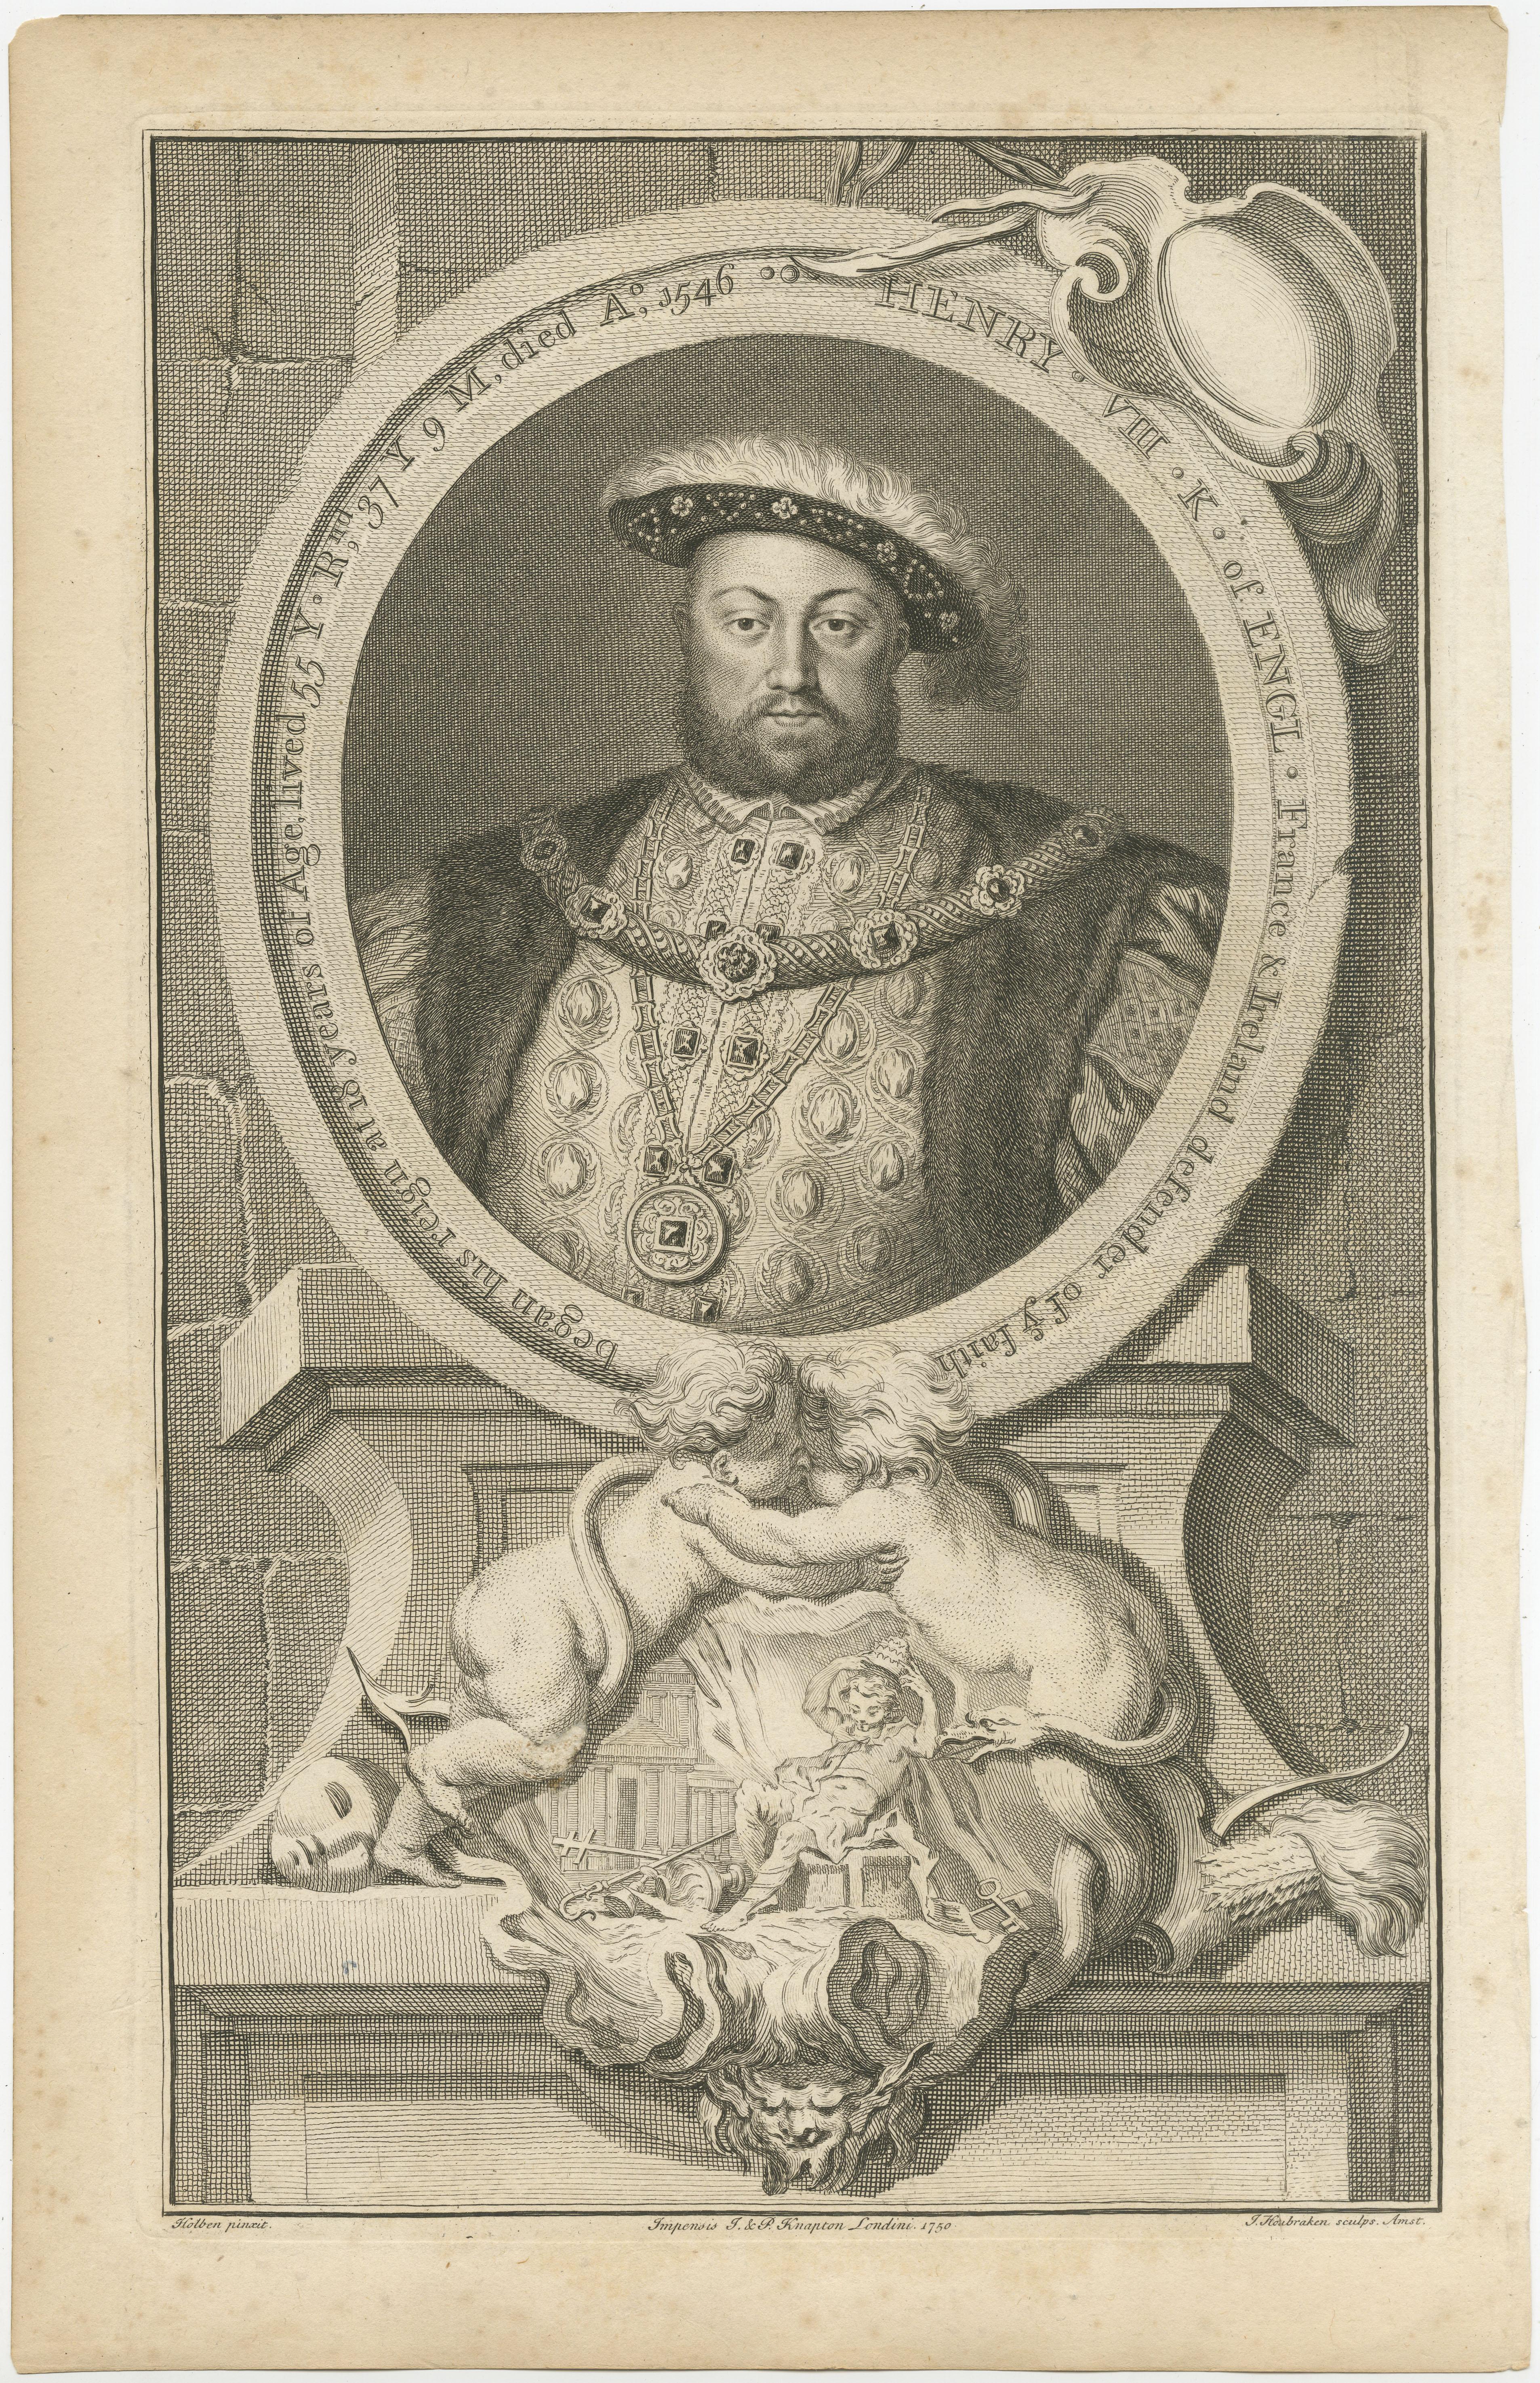 Antique portrait titled 'Henry VIII K of Engl (..)'. Old print of Henry VIII. Henry VIII (28 June 1491 – 28 January 1547) was King of England from 22 April 1509 until his death in 1547. Henry is best known for his six marriages, and for his efforts